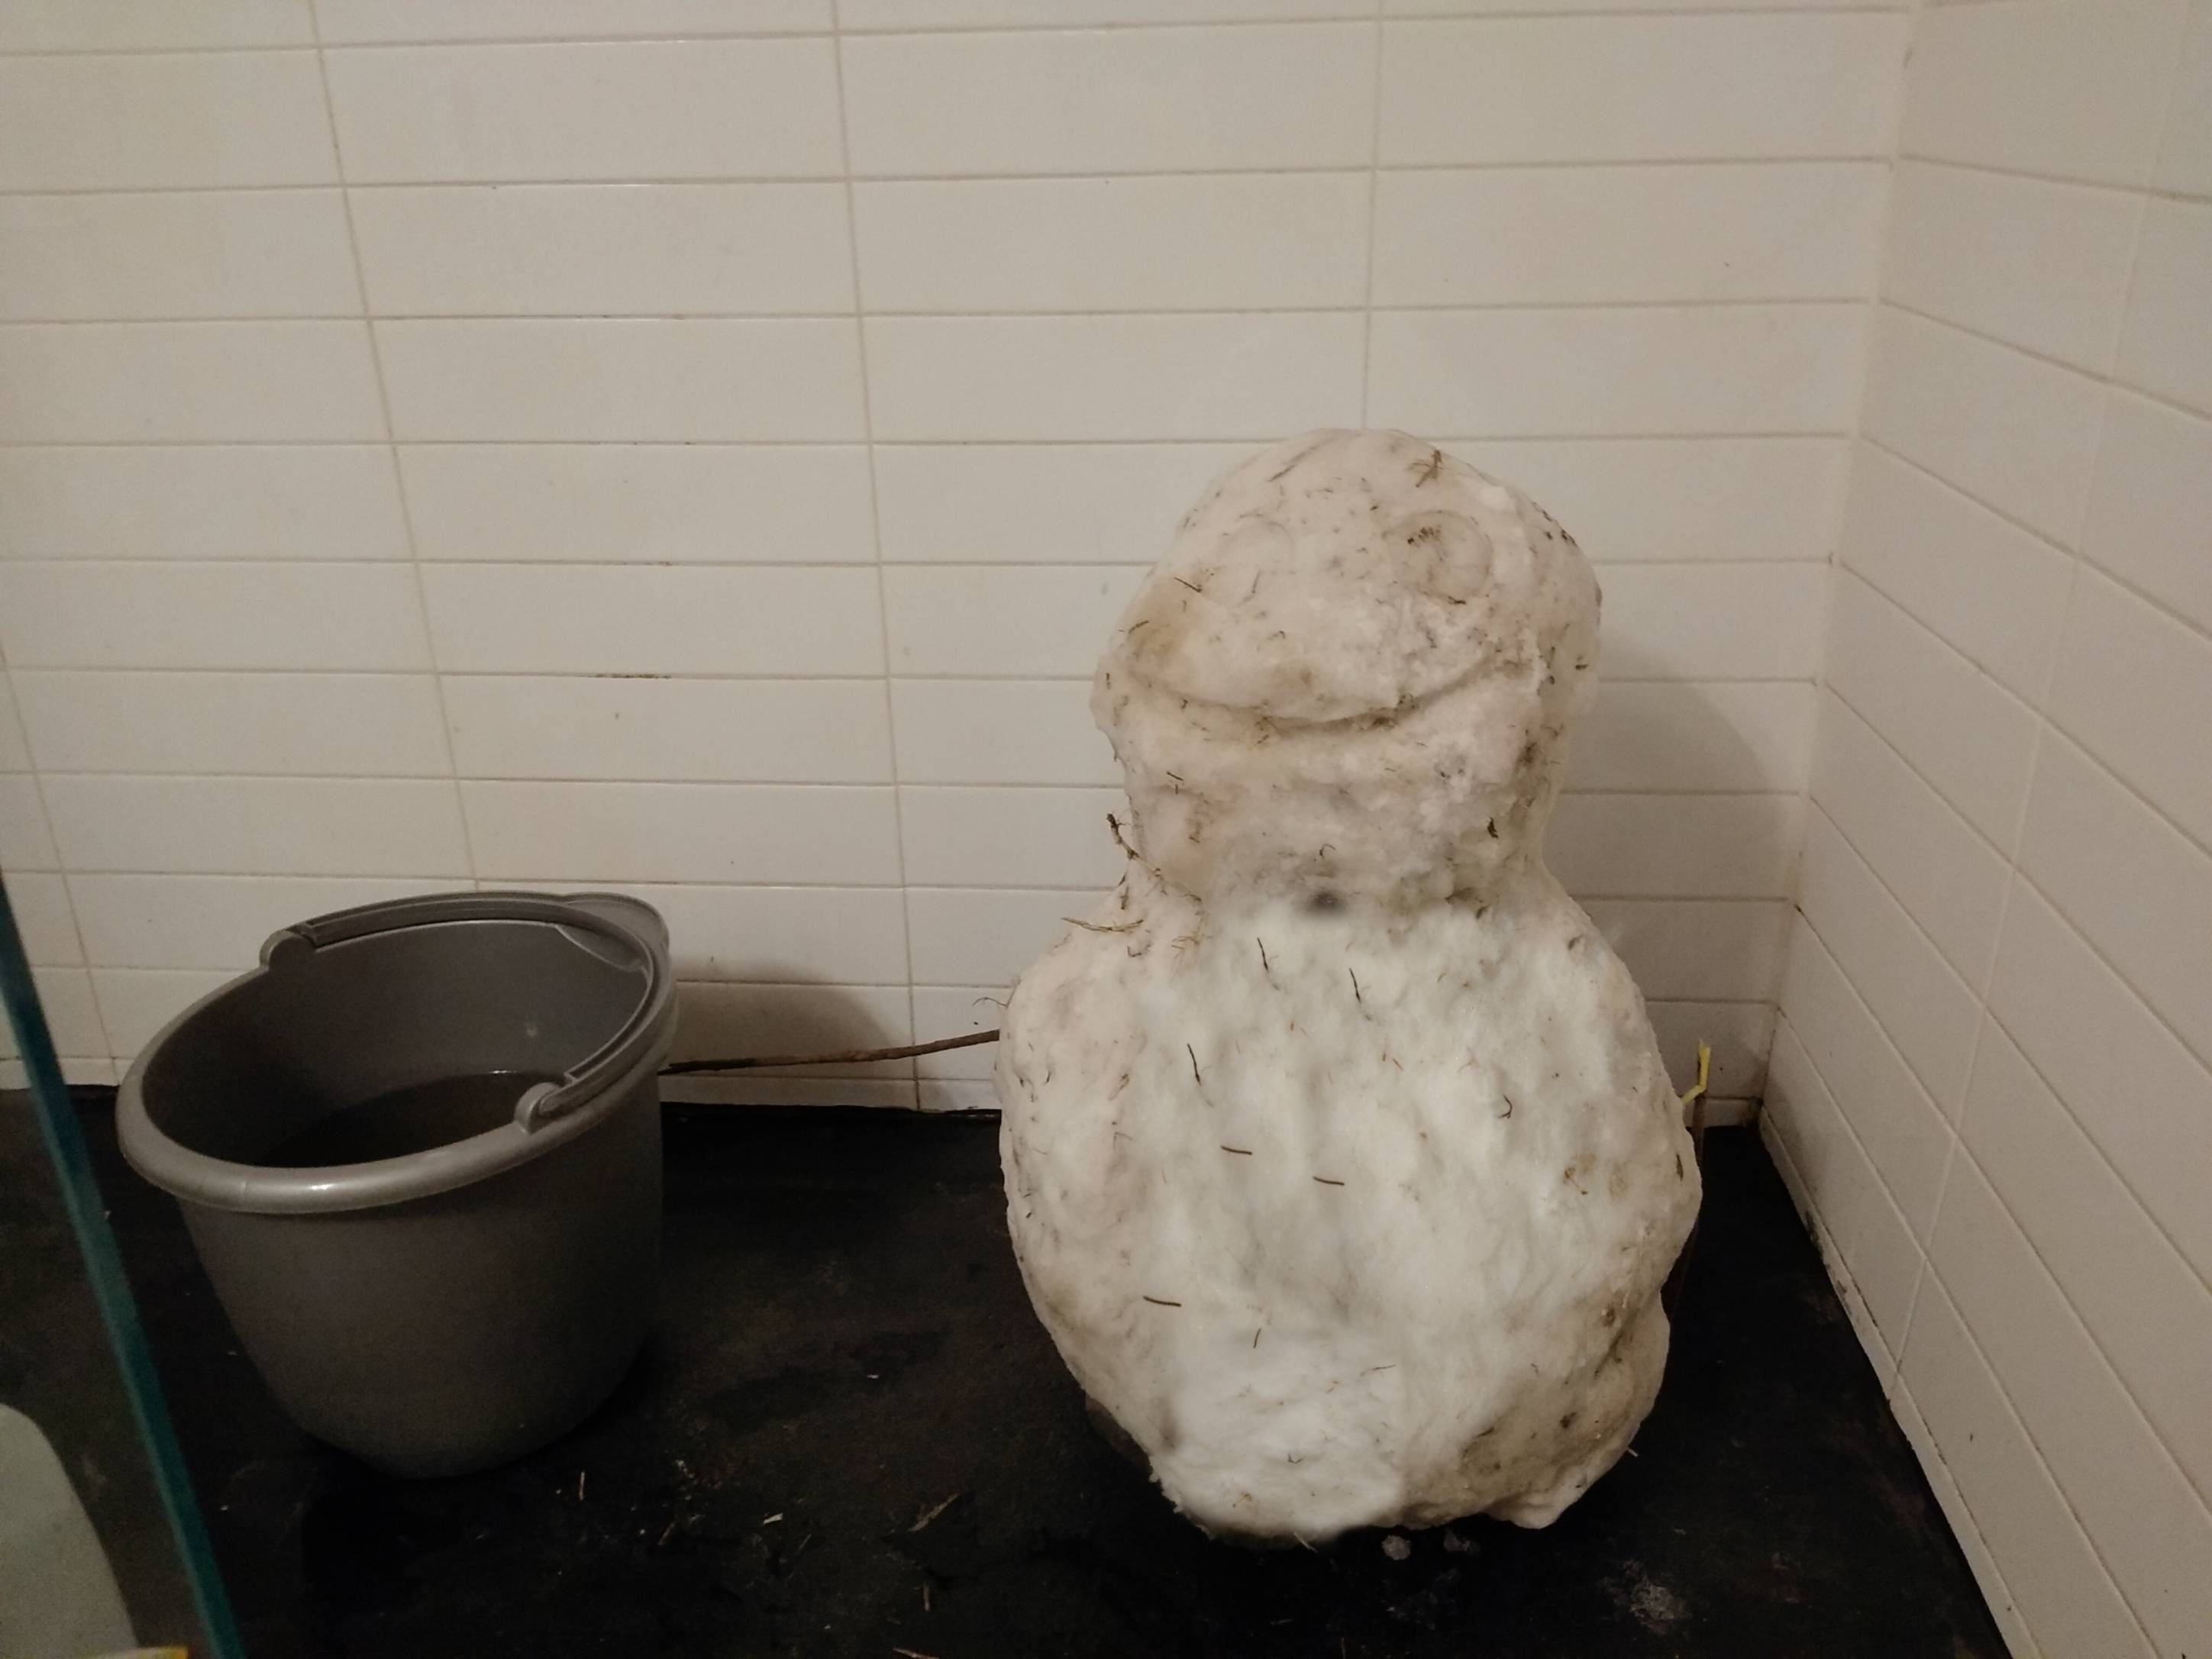 The water is cut off, so I had to steal some kids snowman so I can melt him to flush my toilet.